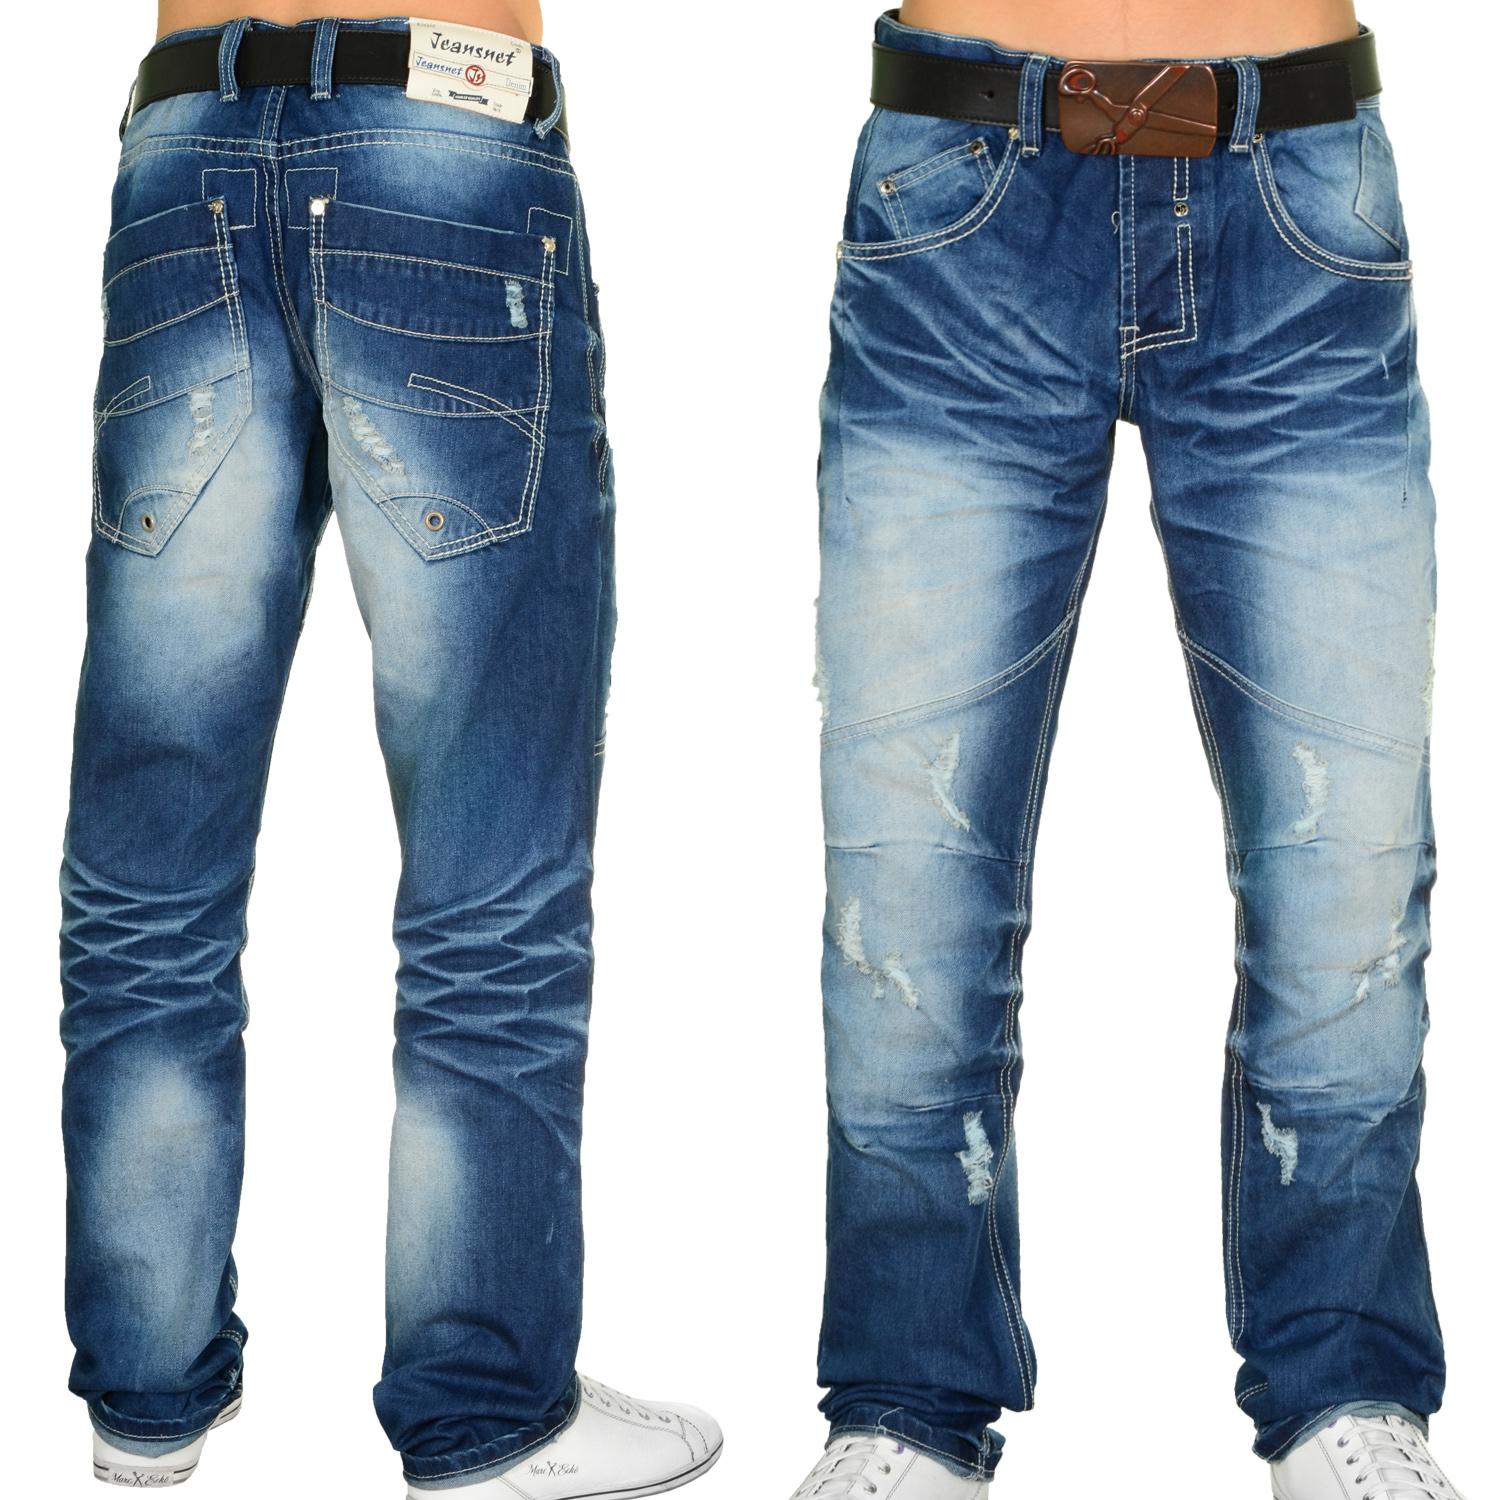 Foto Jeansnet Dirty Washed Slim Fit Jeans Azul